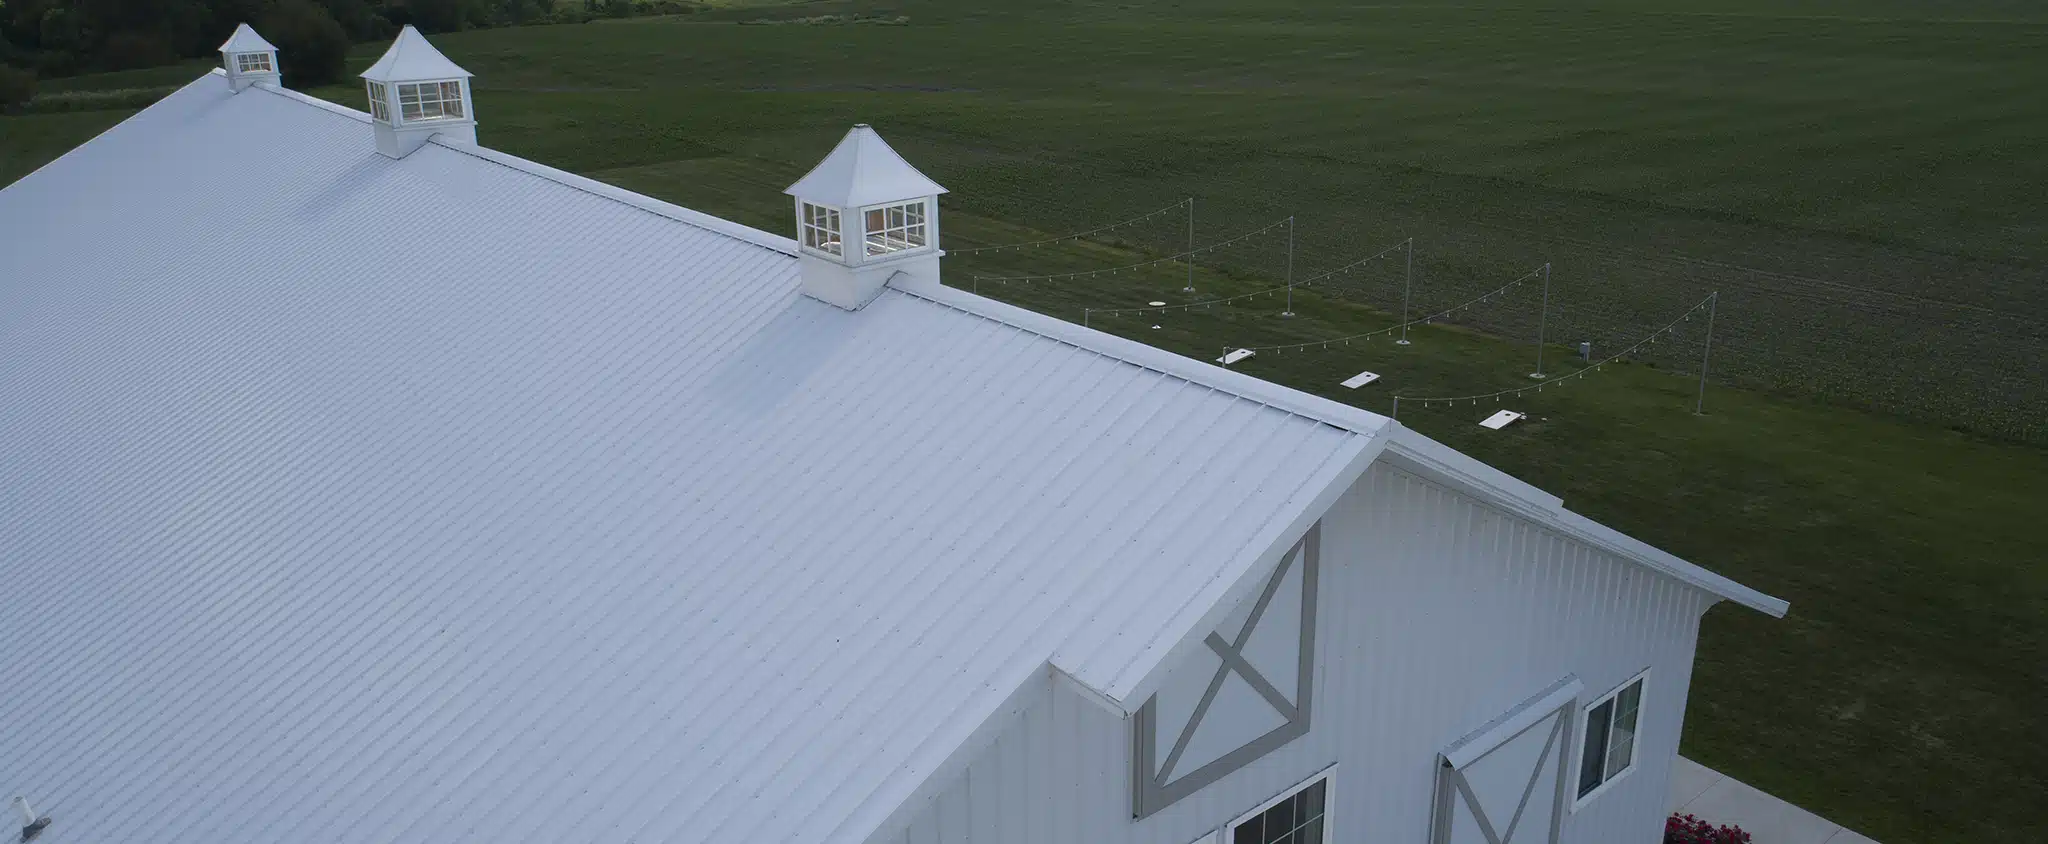 Wedding venue building with white metal roof